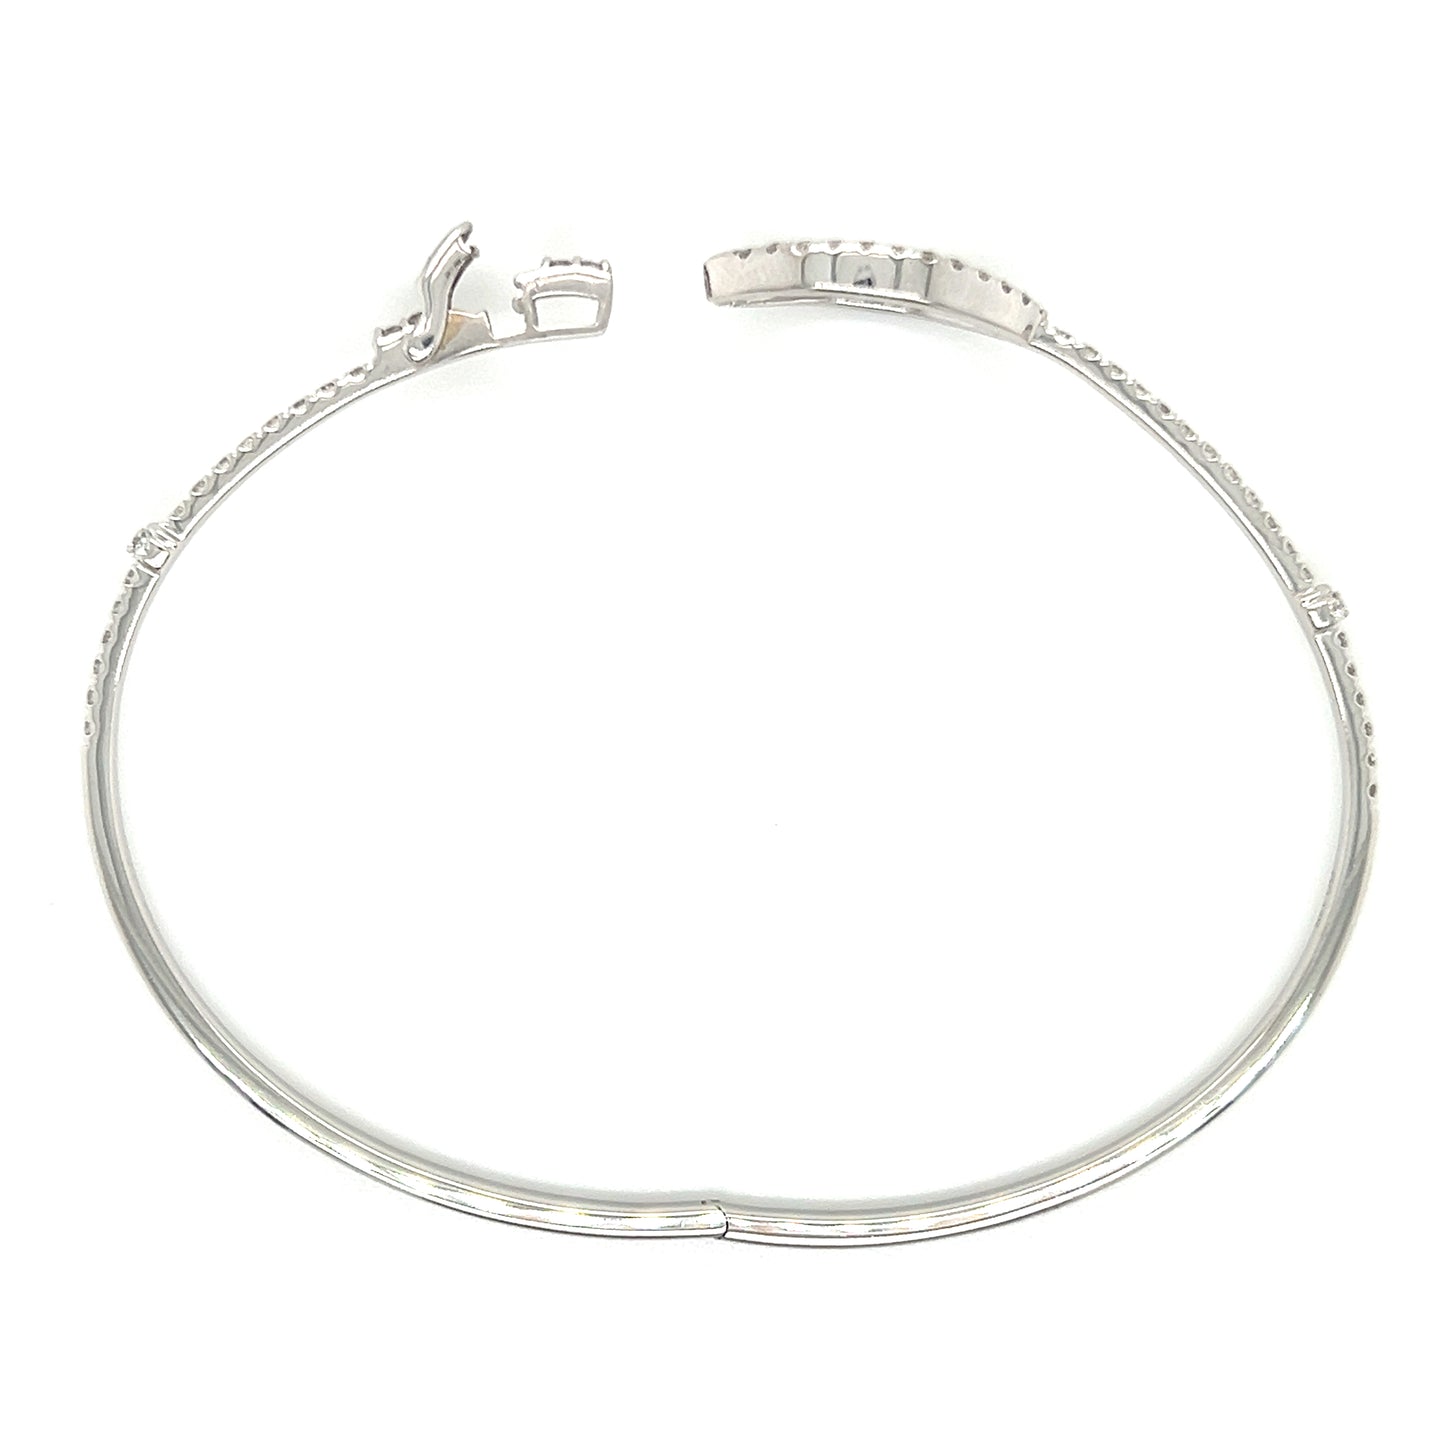 Diamond Buckle Bangle Bracelet with 0.88CTW of Diamonds in 14K White Gold with Open Clasp